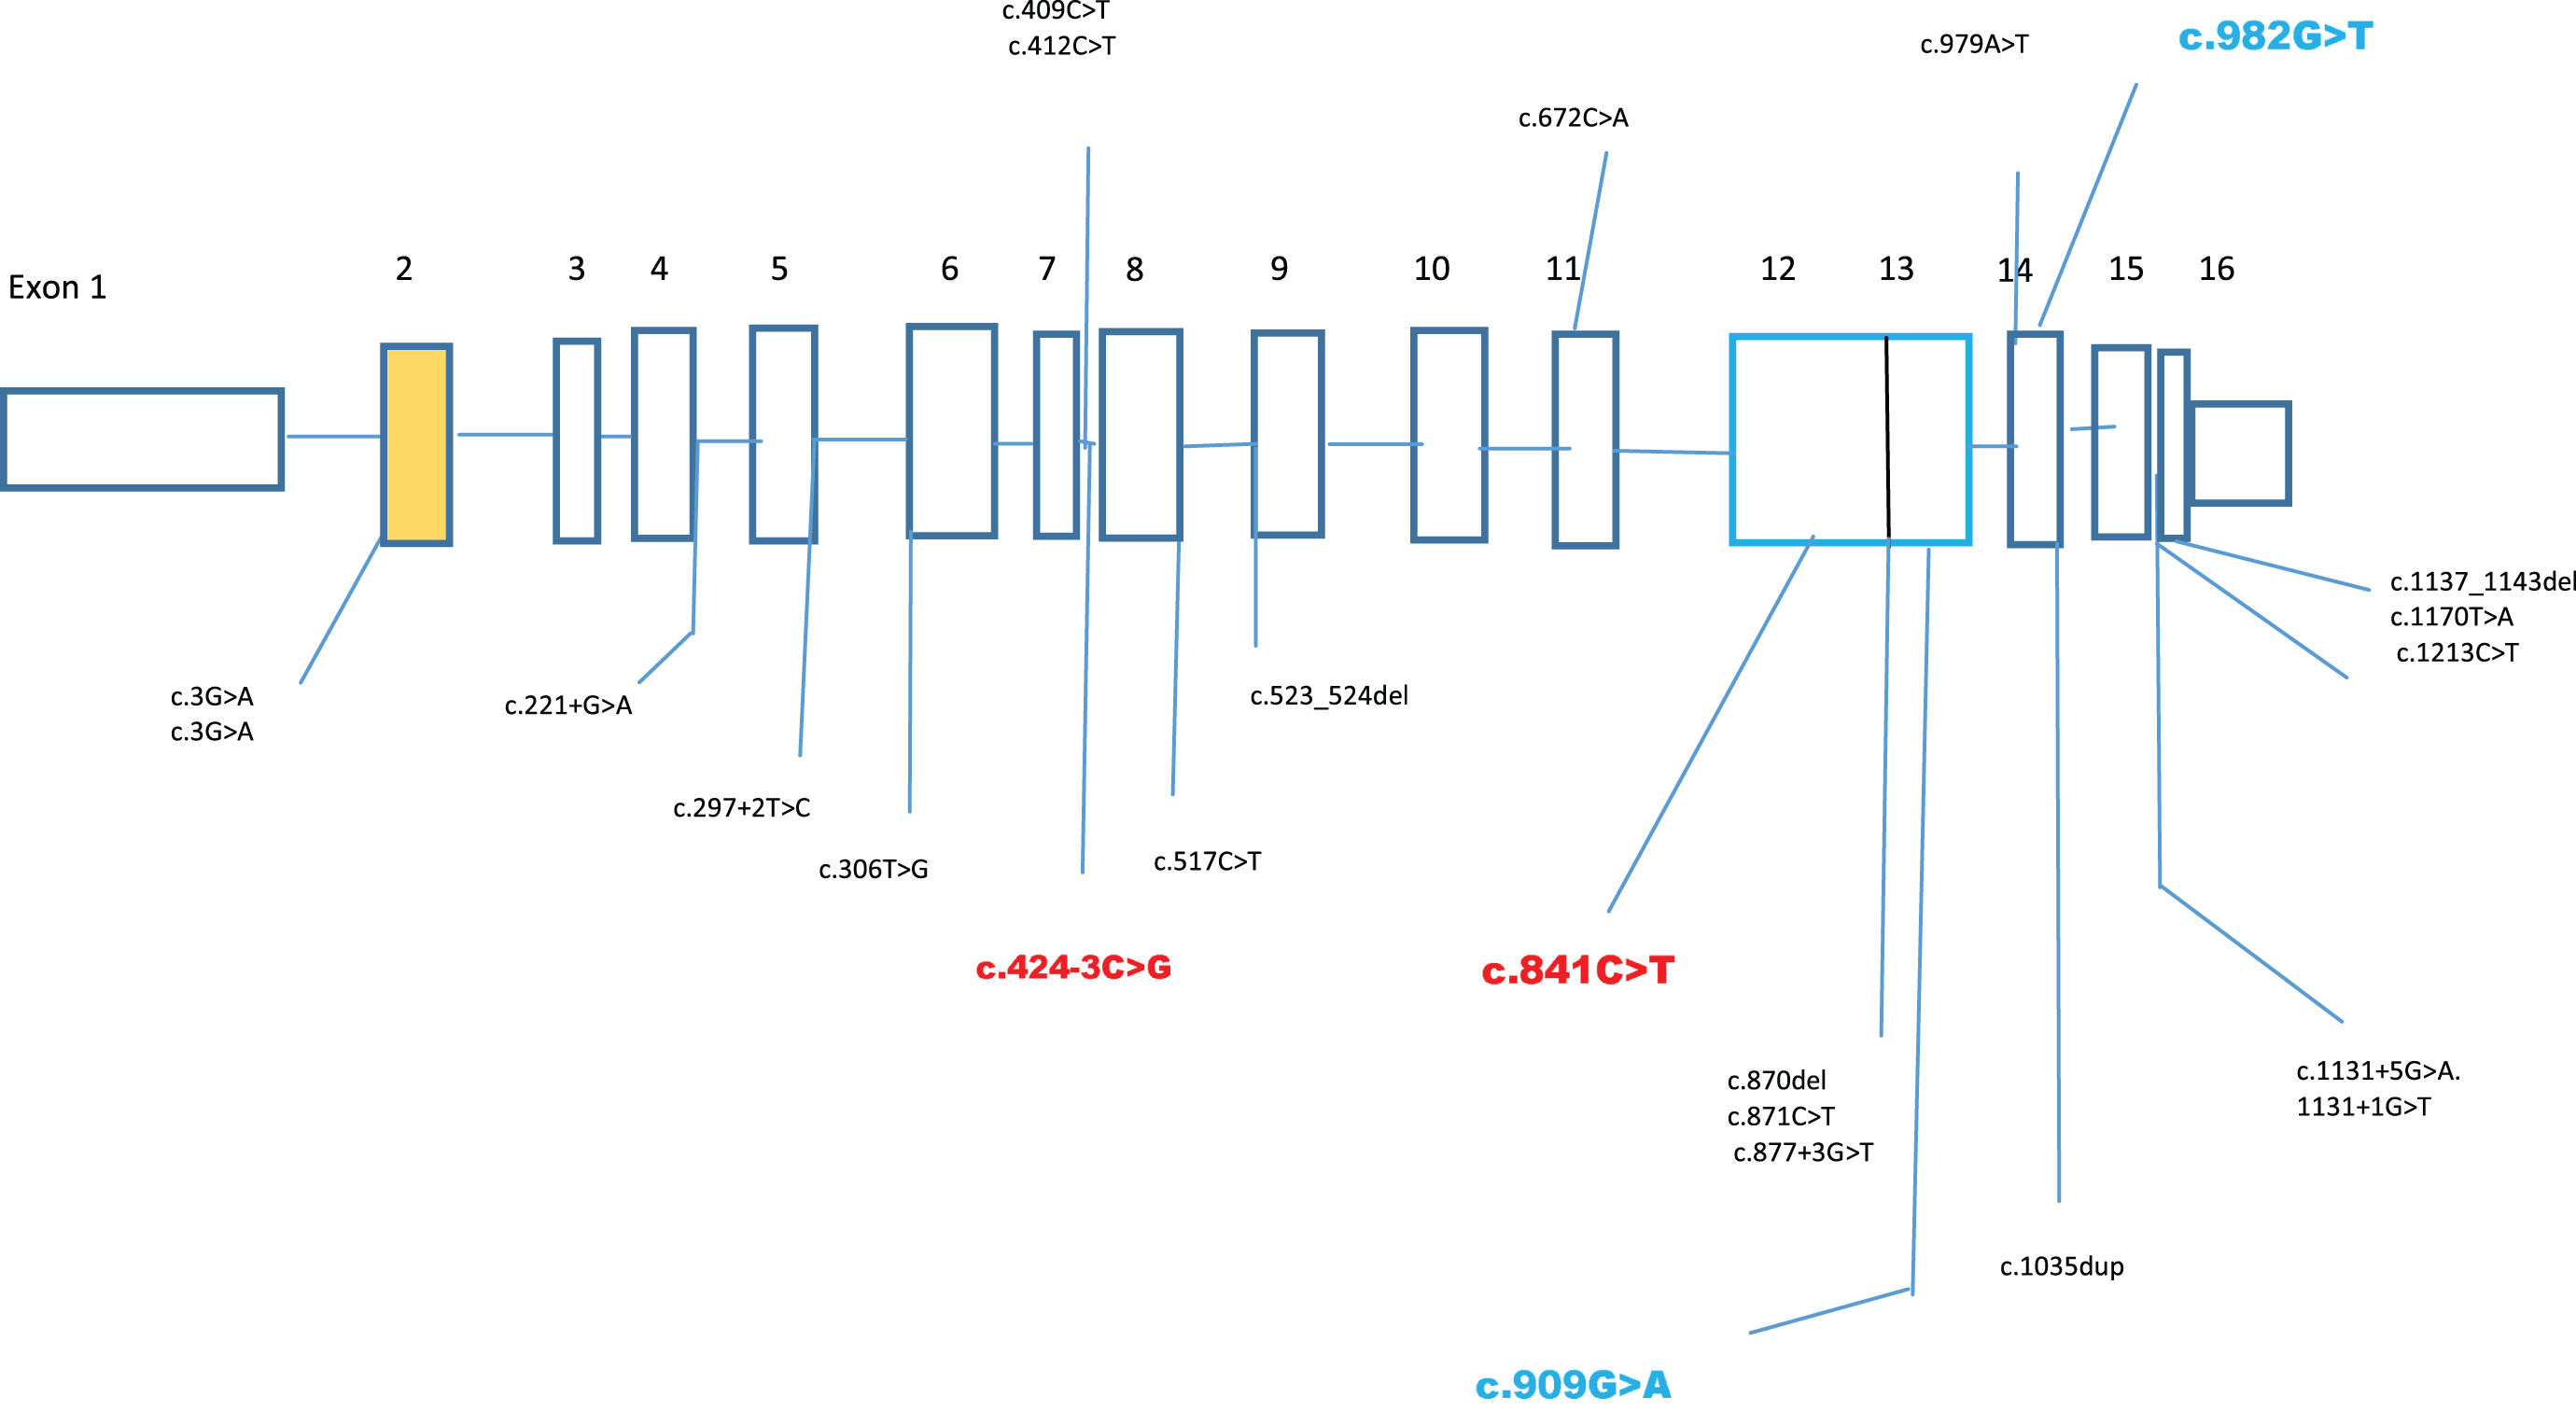 Gene structure of AGK gene and localisation of the mutations in both the cases, novel mutations in case 1 are highlighted in blue and in case 2 are highlighted in red colour. Reference: Haghighi et al. [9].